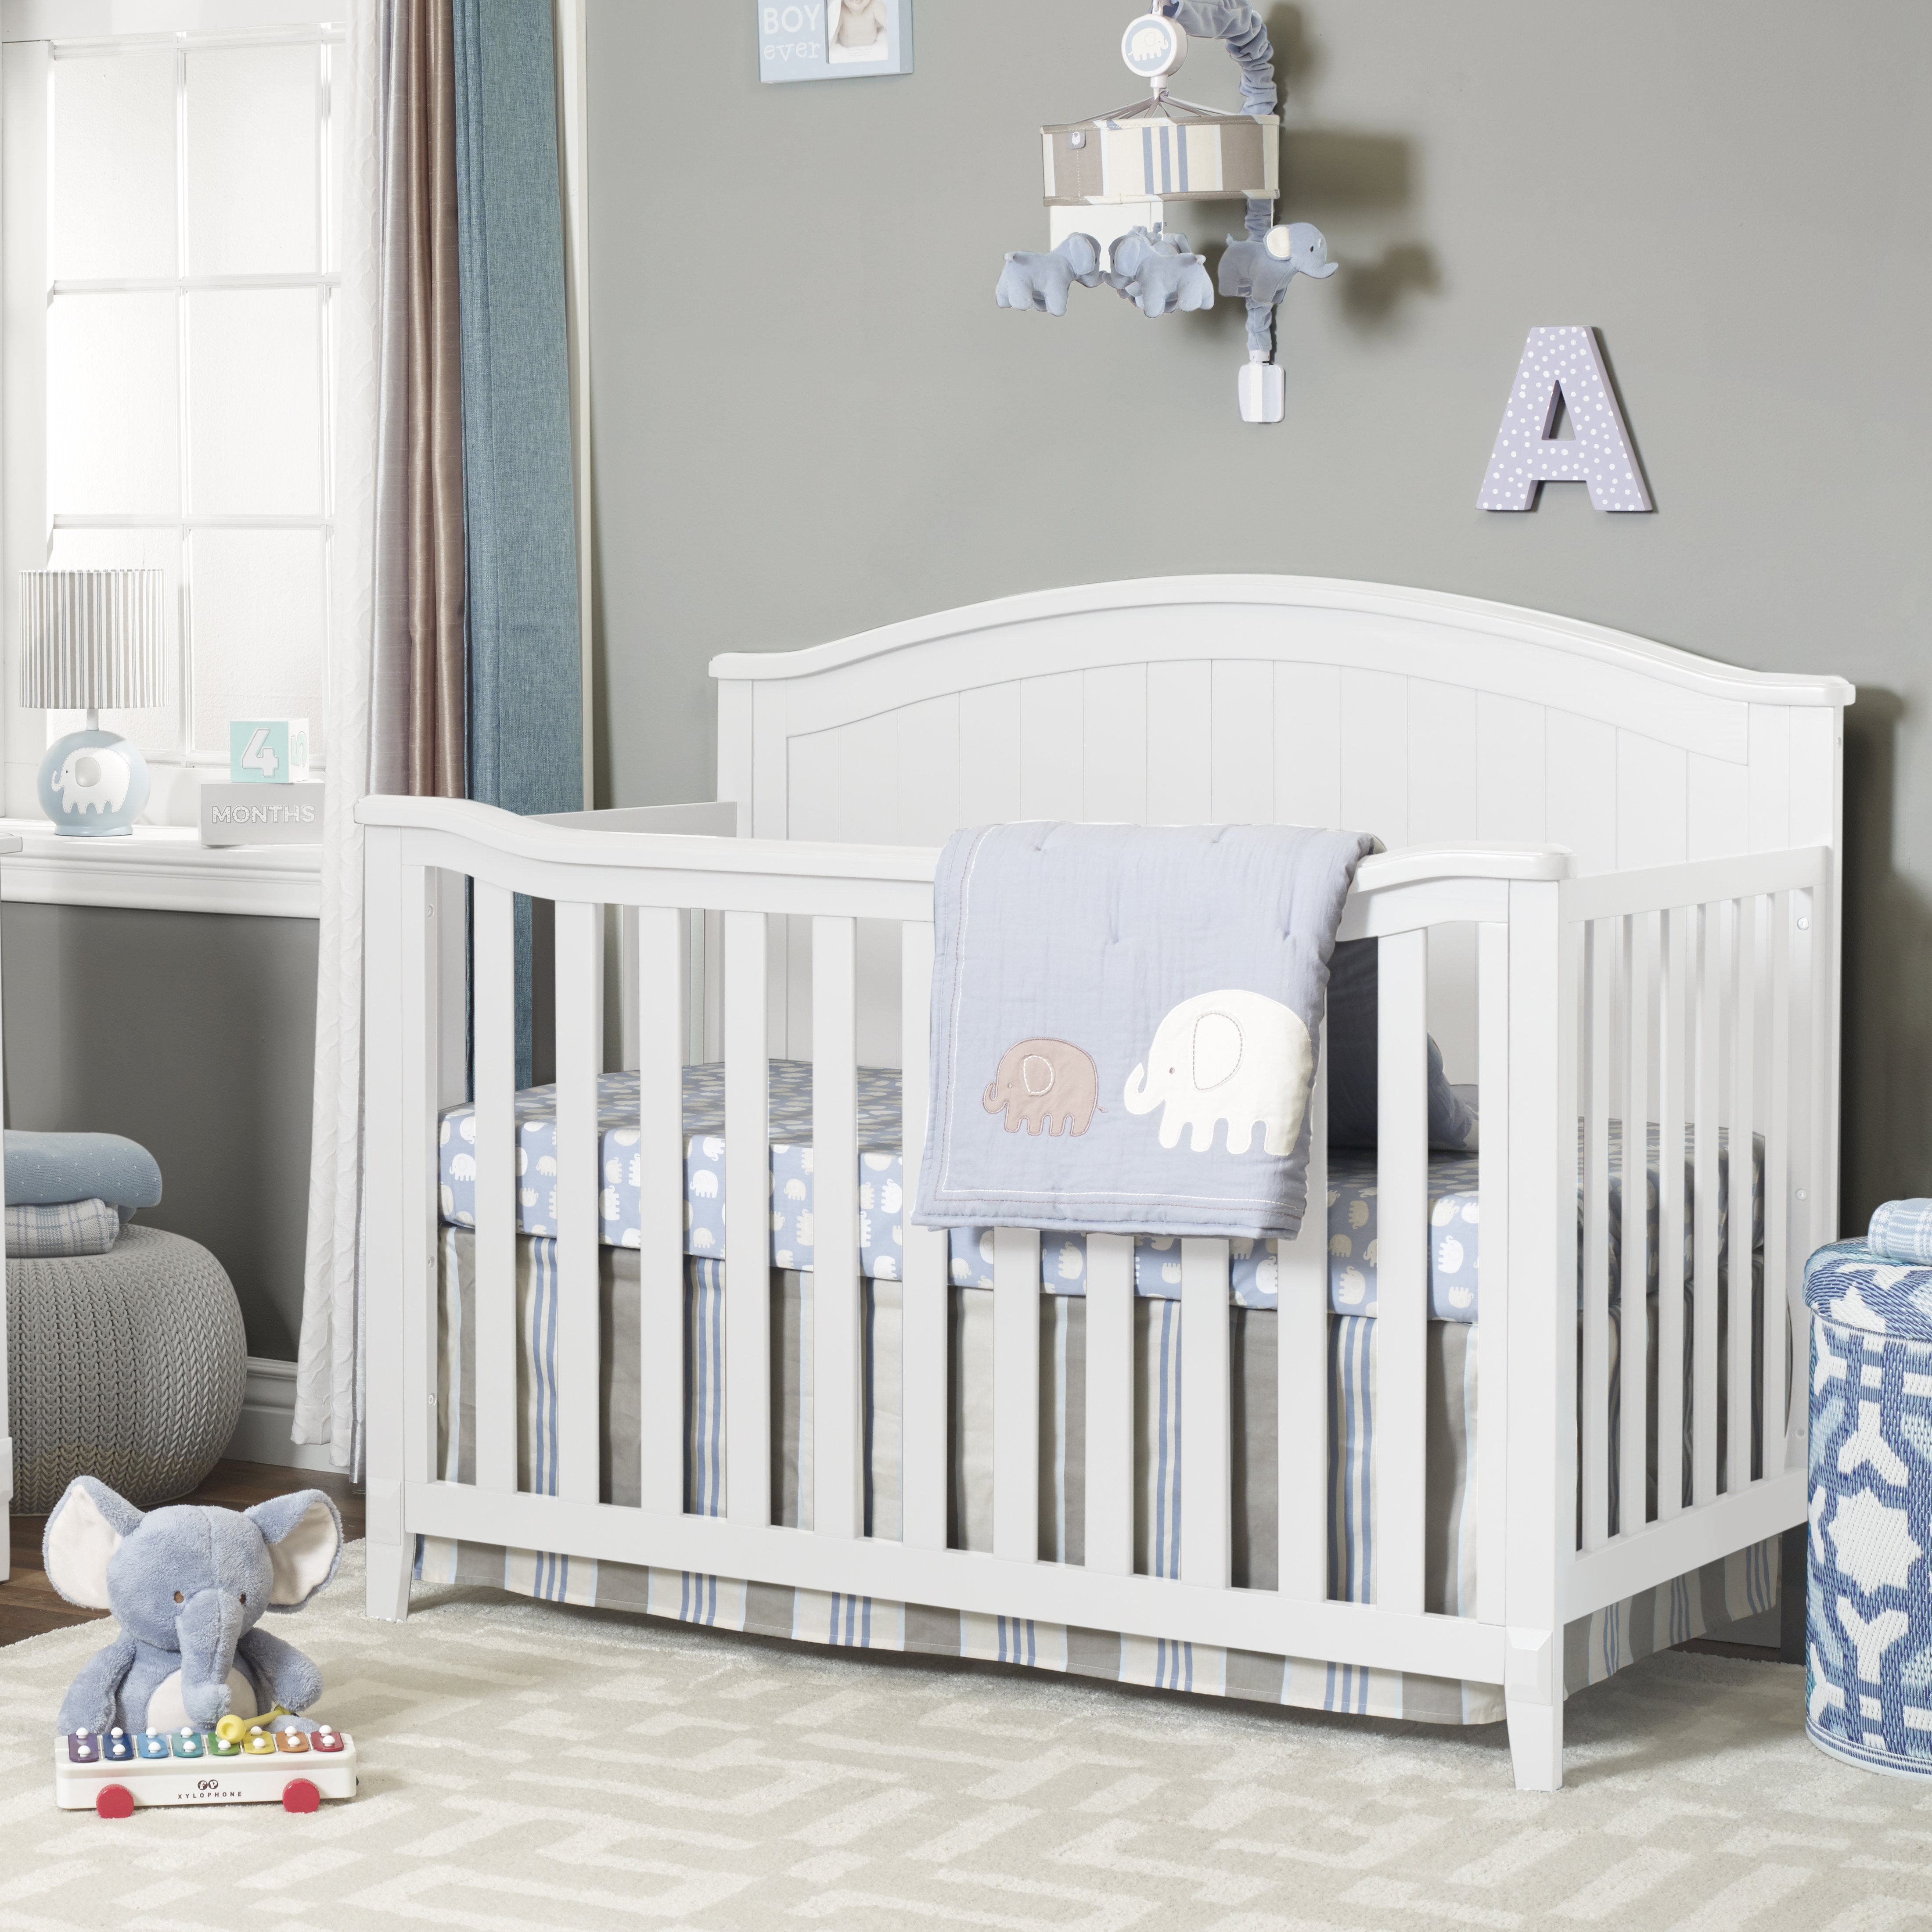 convertible crib into full size bed